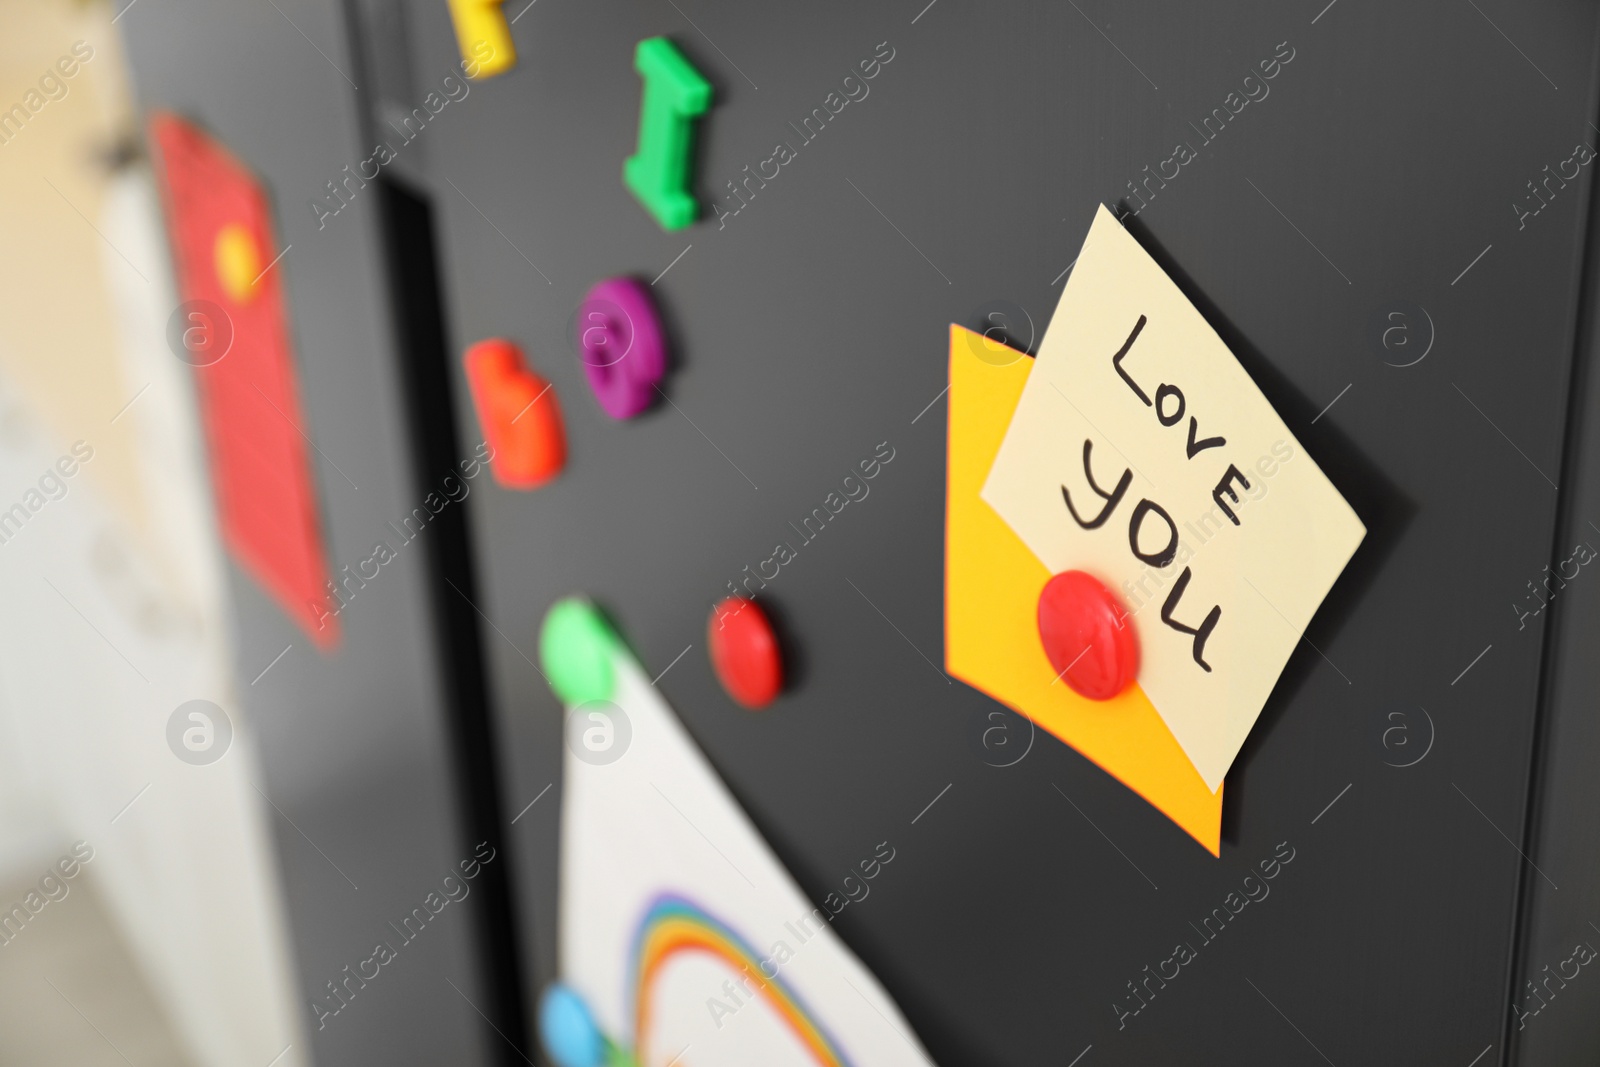 Photo of Note with phrase LOVE YOU and magnets on refrigerator, closeup